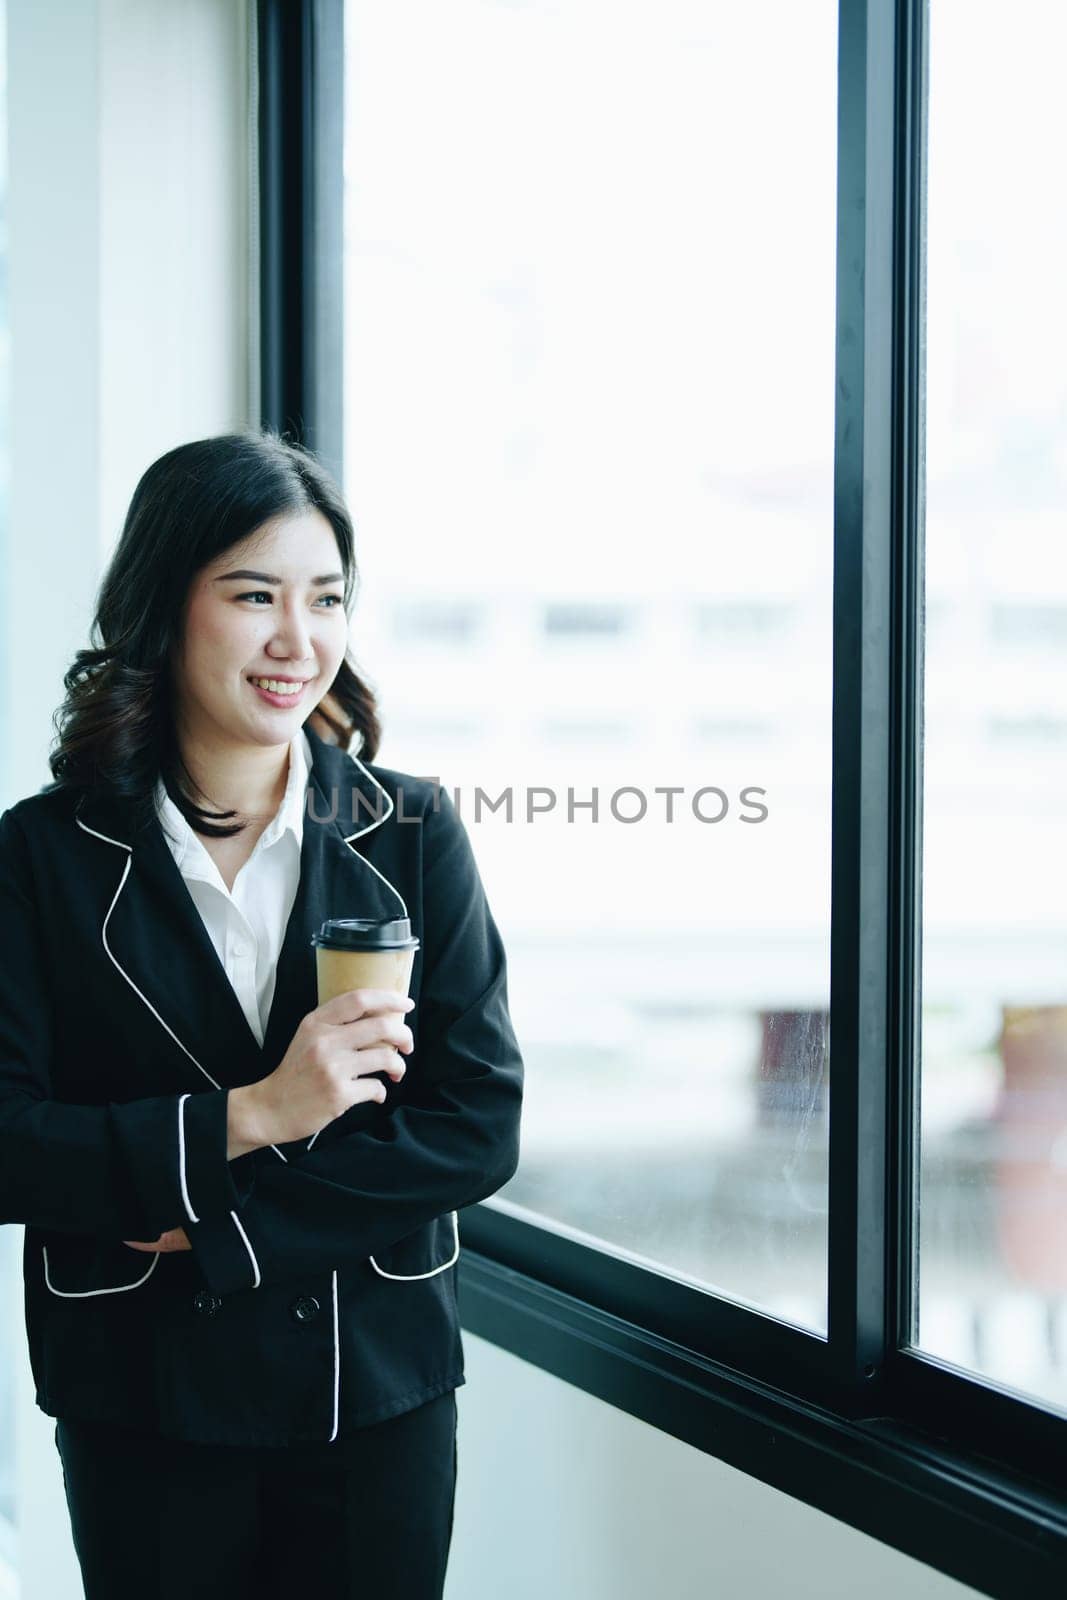 A portrait of a young Asian businesswoman smiling happily and drinking coffee by the window in the conference room.